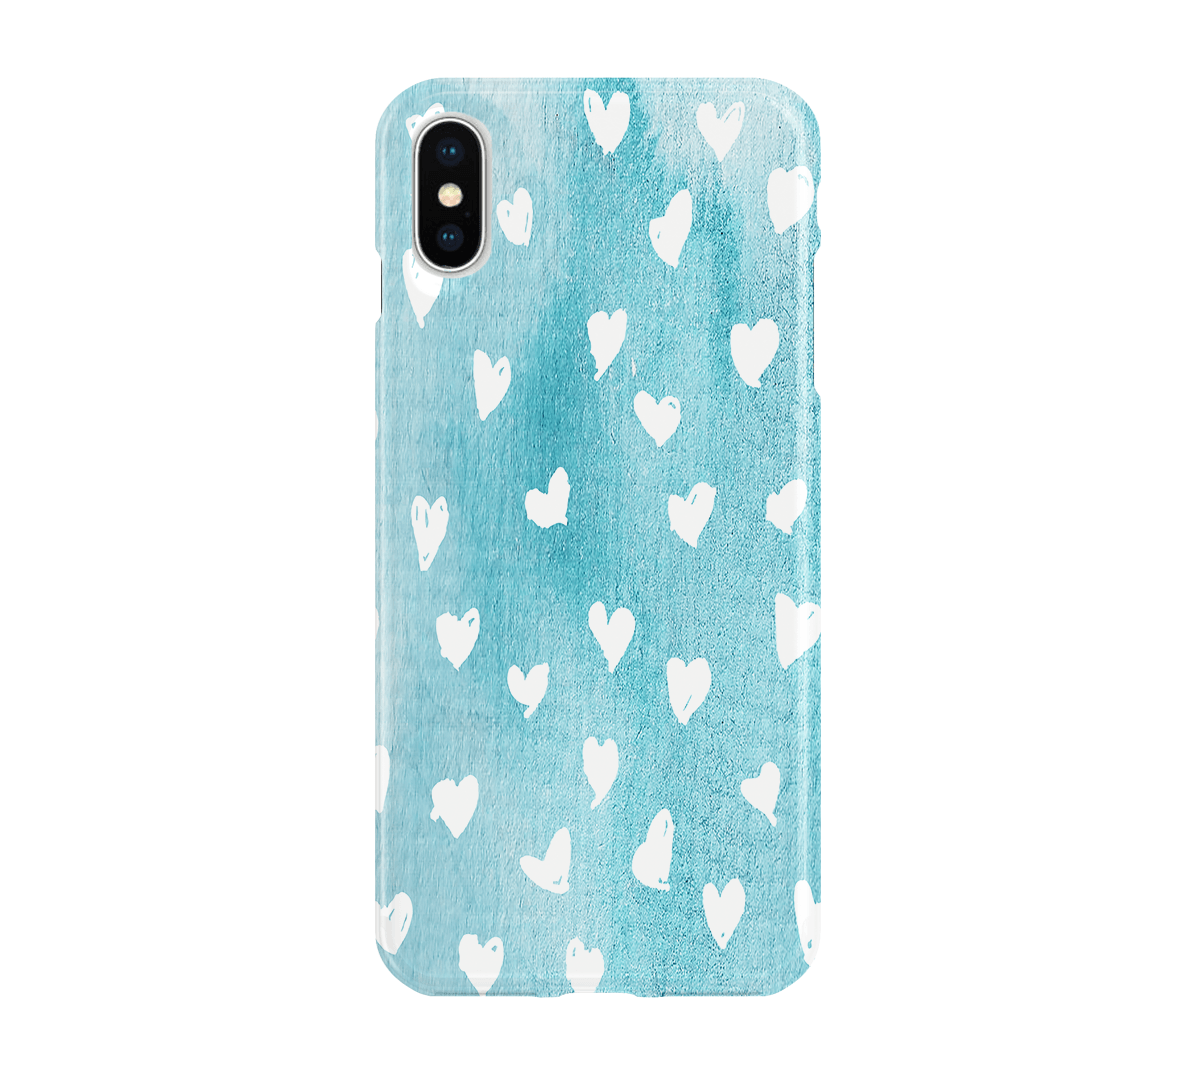 Blue Heart - iPhone phone case designs by CaseSwagger